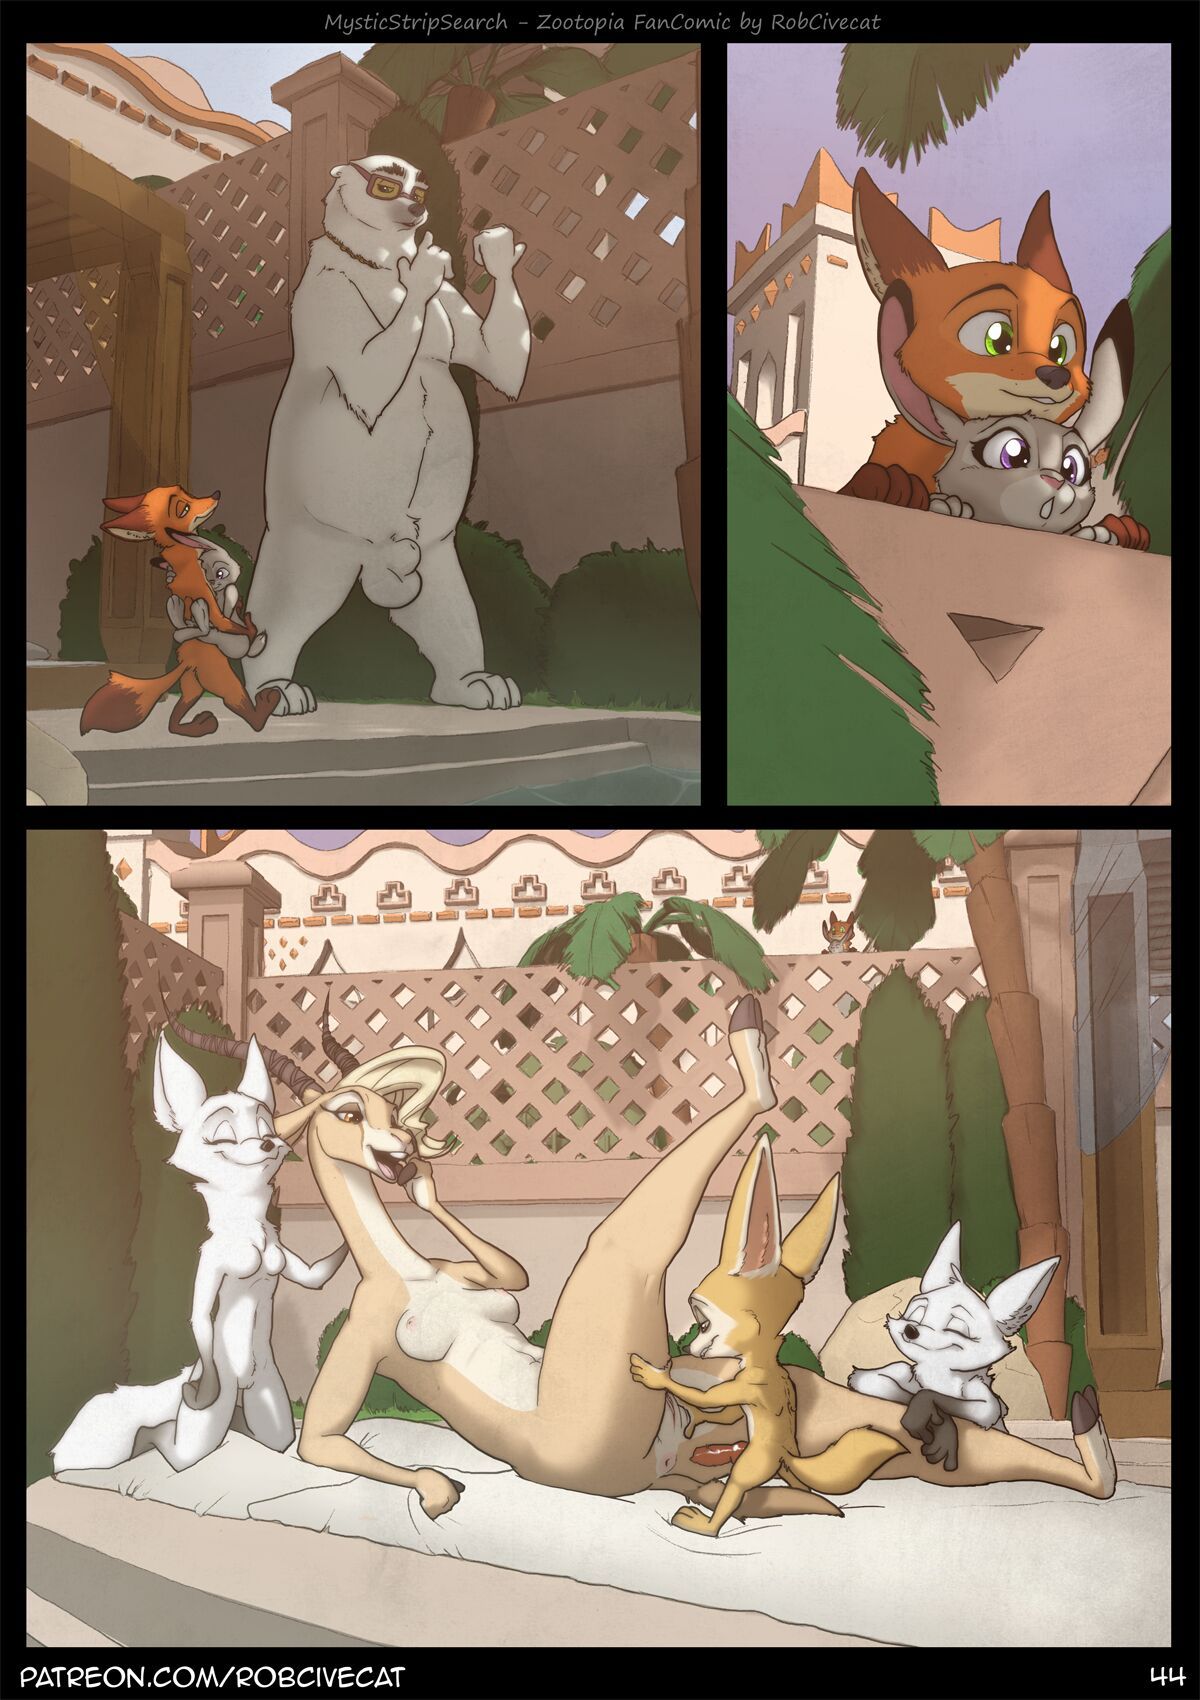 [RobCivecat] Mystic Strip Search (Zootopia) [Ongoing] 45